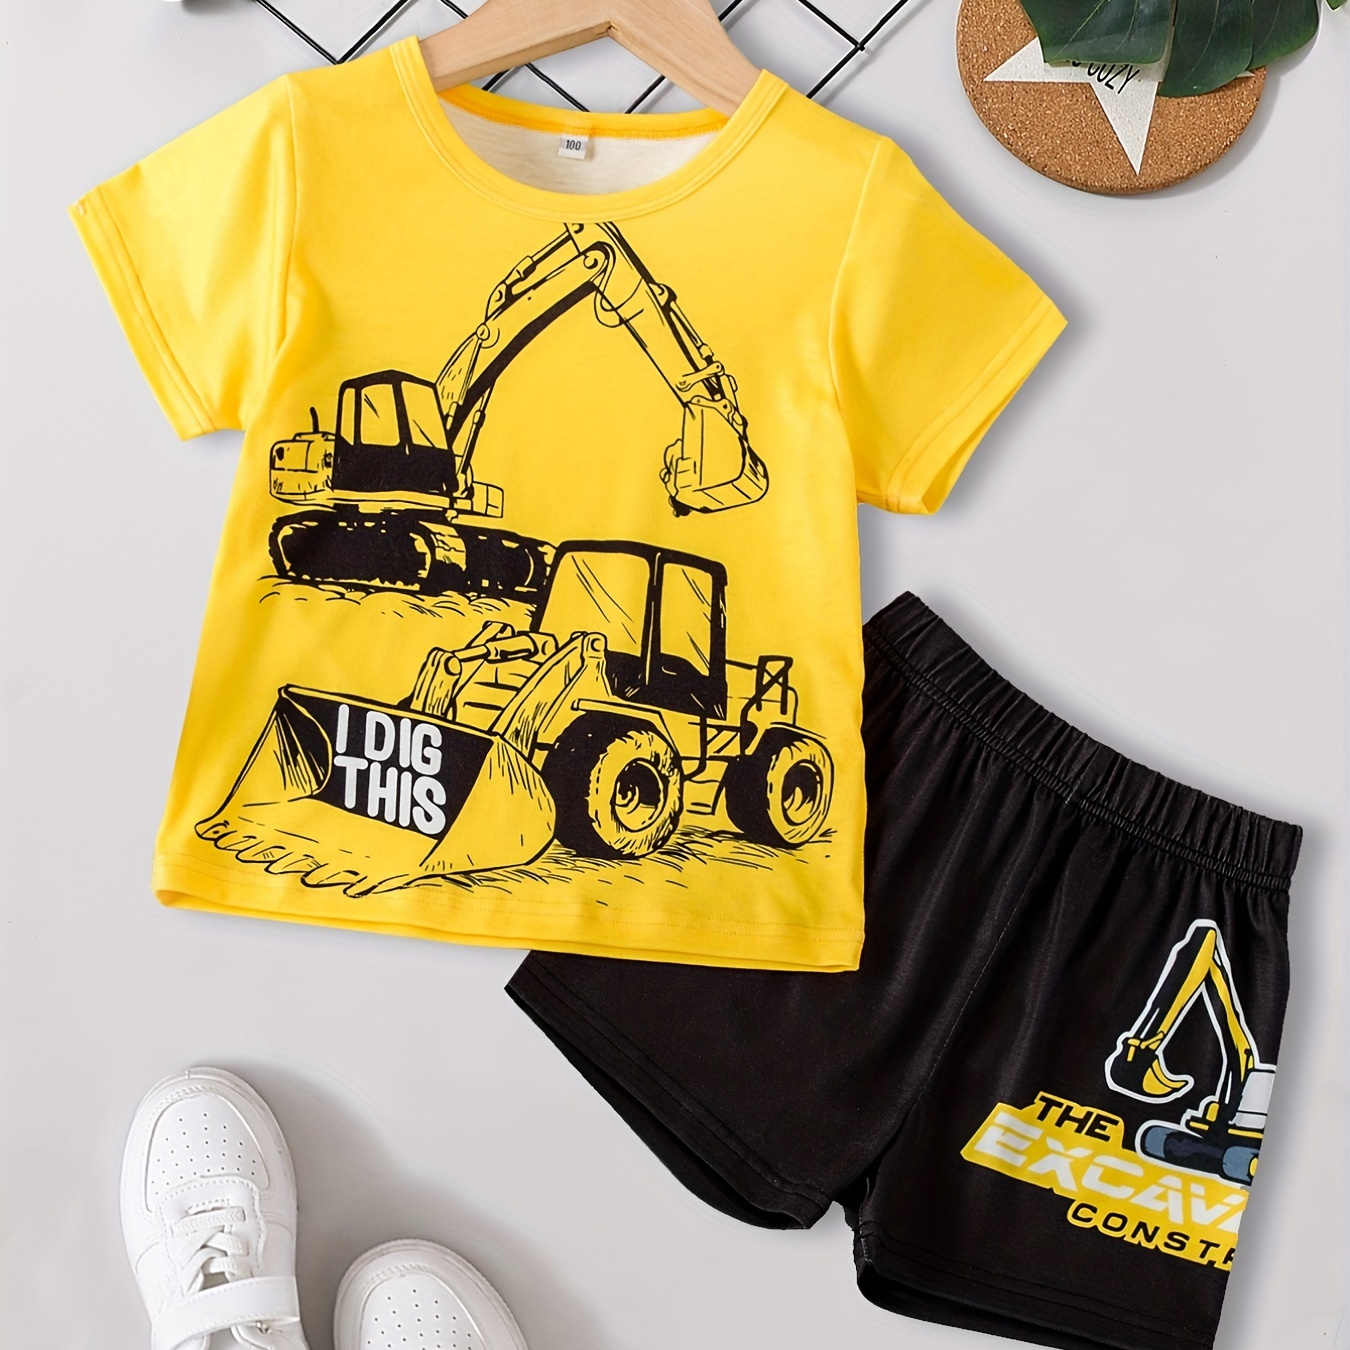 

Toddler Boy's 2pcs, T-shirt & Shorts Set, Cartoon Engineering Car Print Short Sleeve Top, Color Clash Casual Outfits, Kids Clothes For Summer